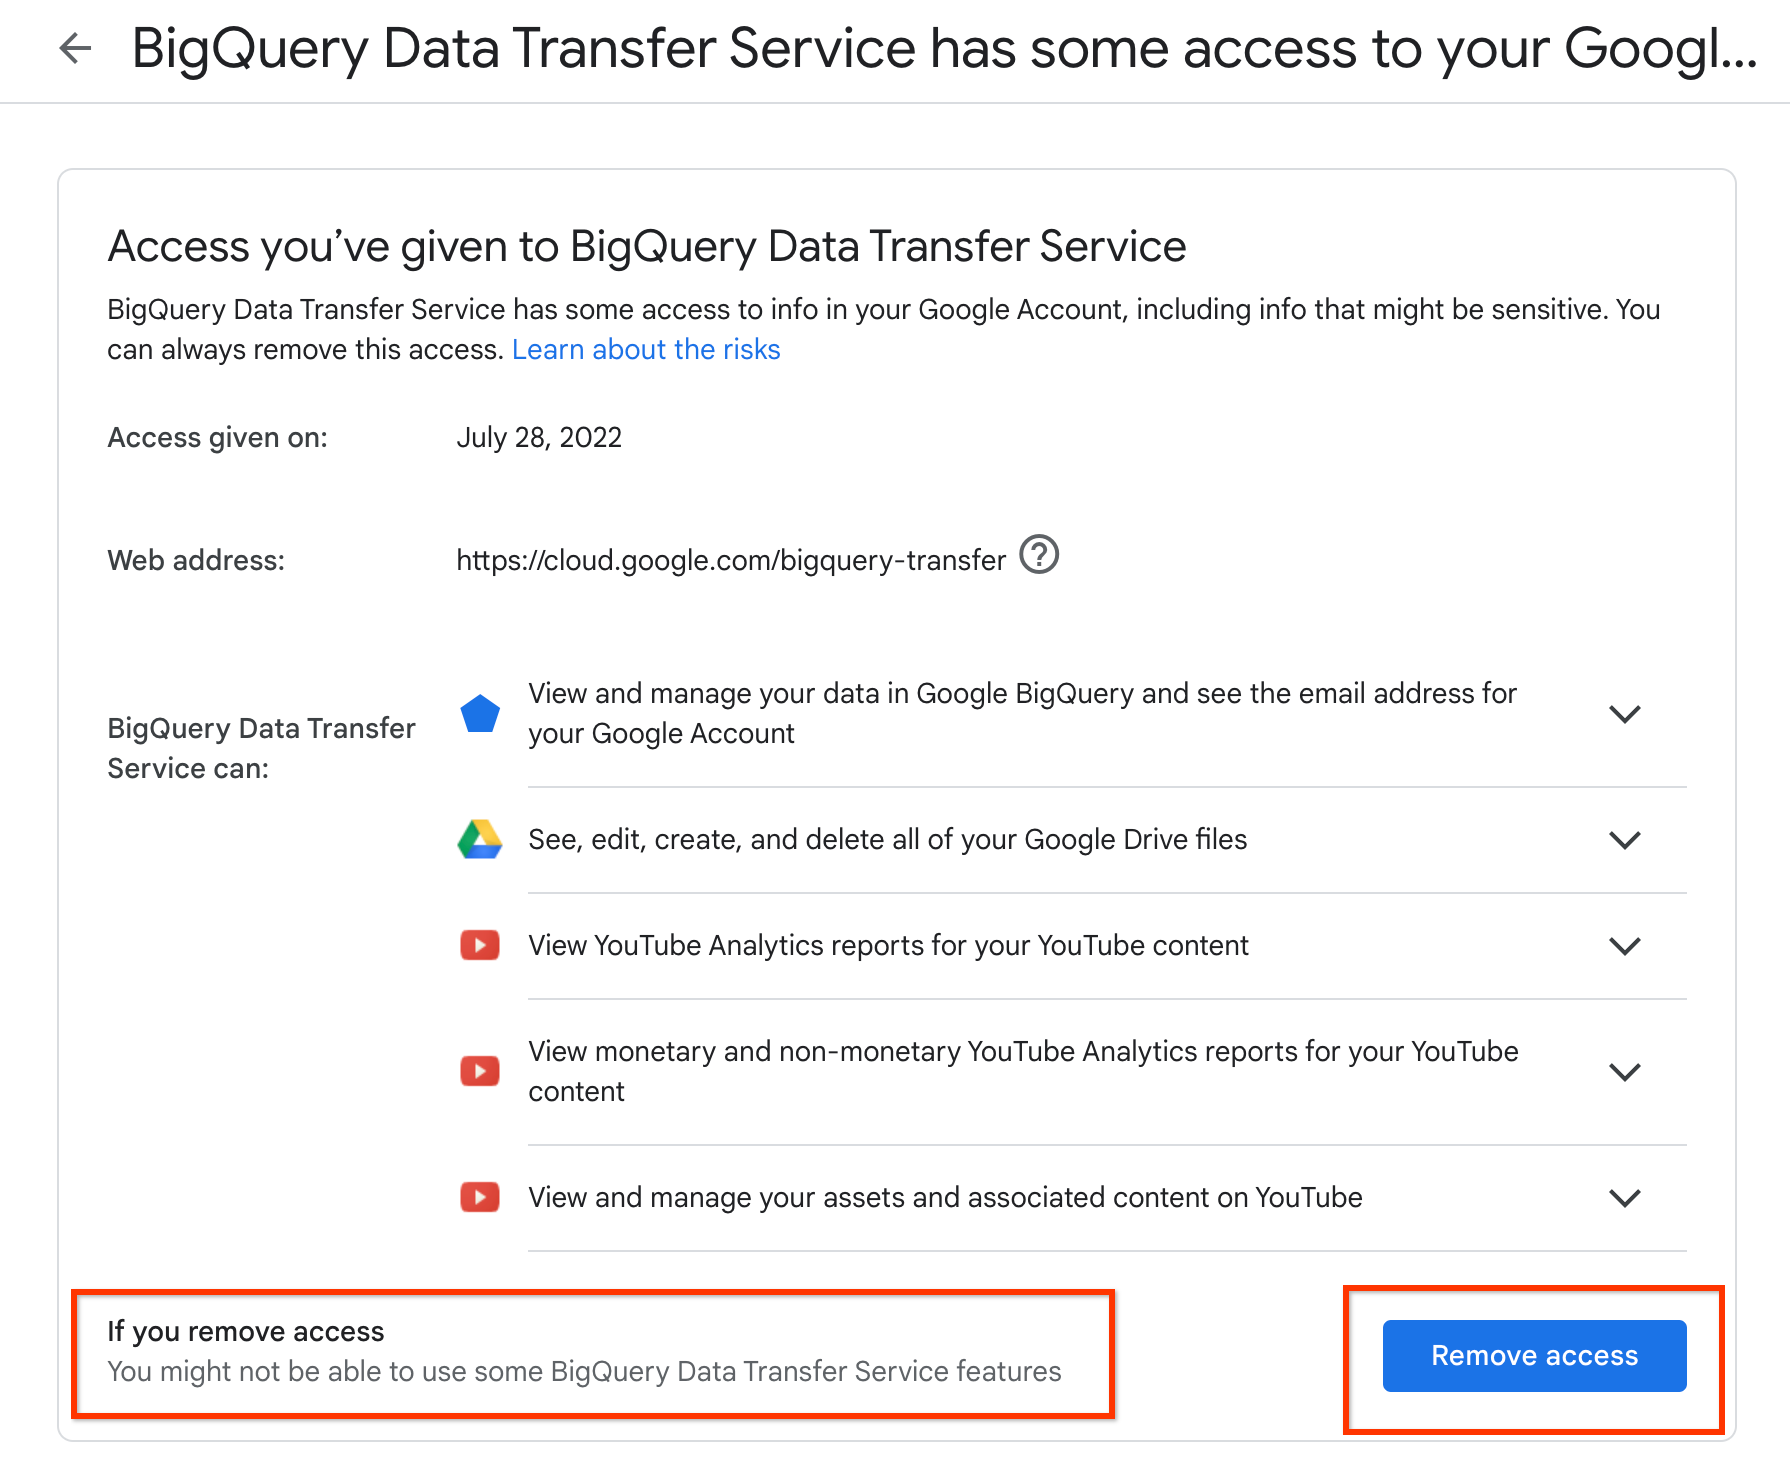 Remove access that you've given to BigQuery Data Transfer Service.